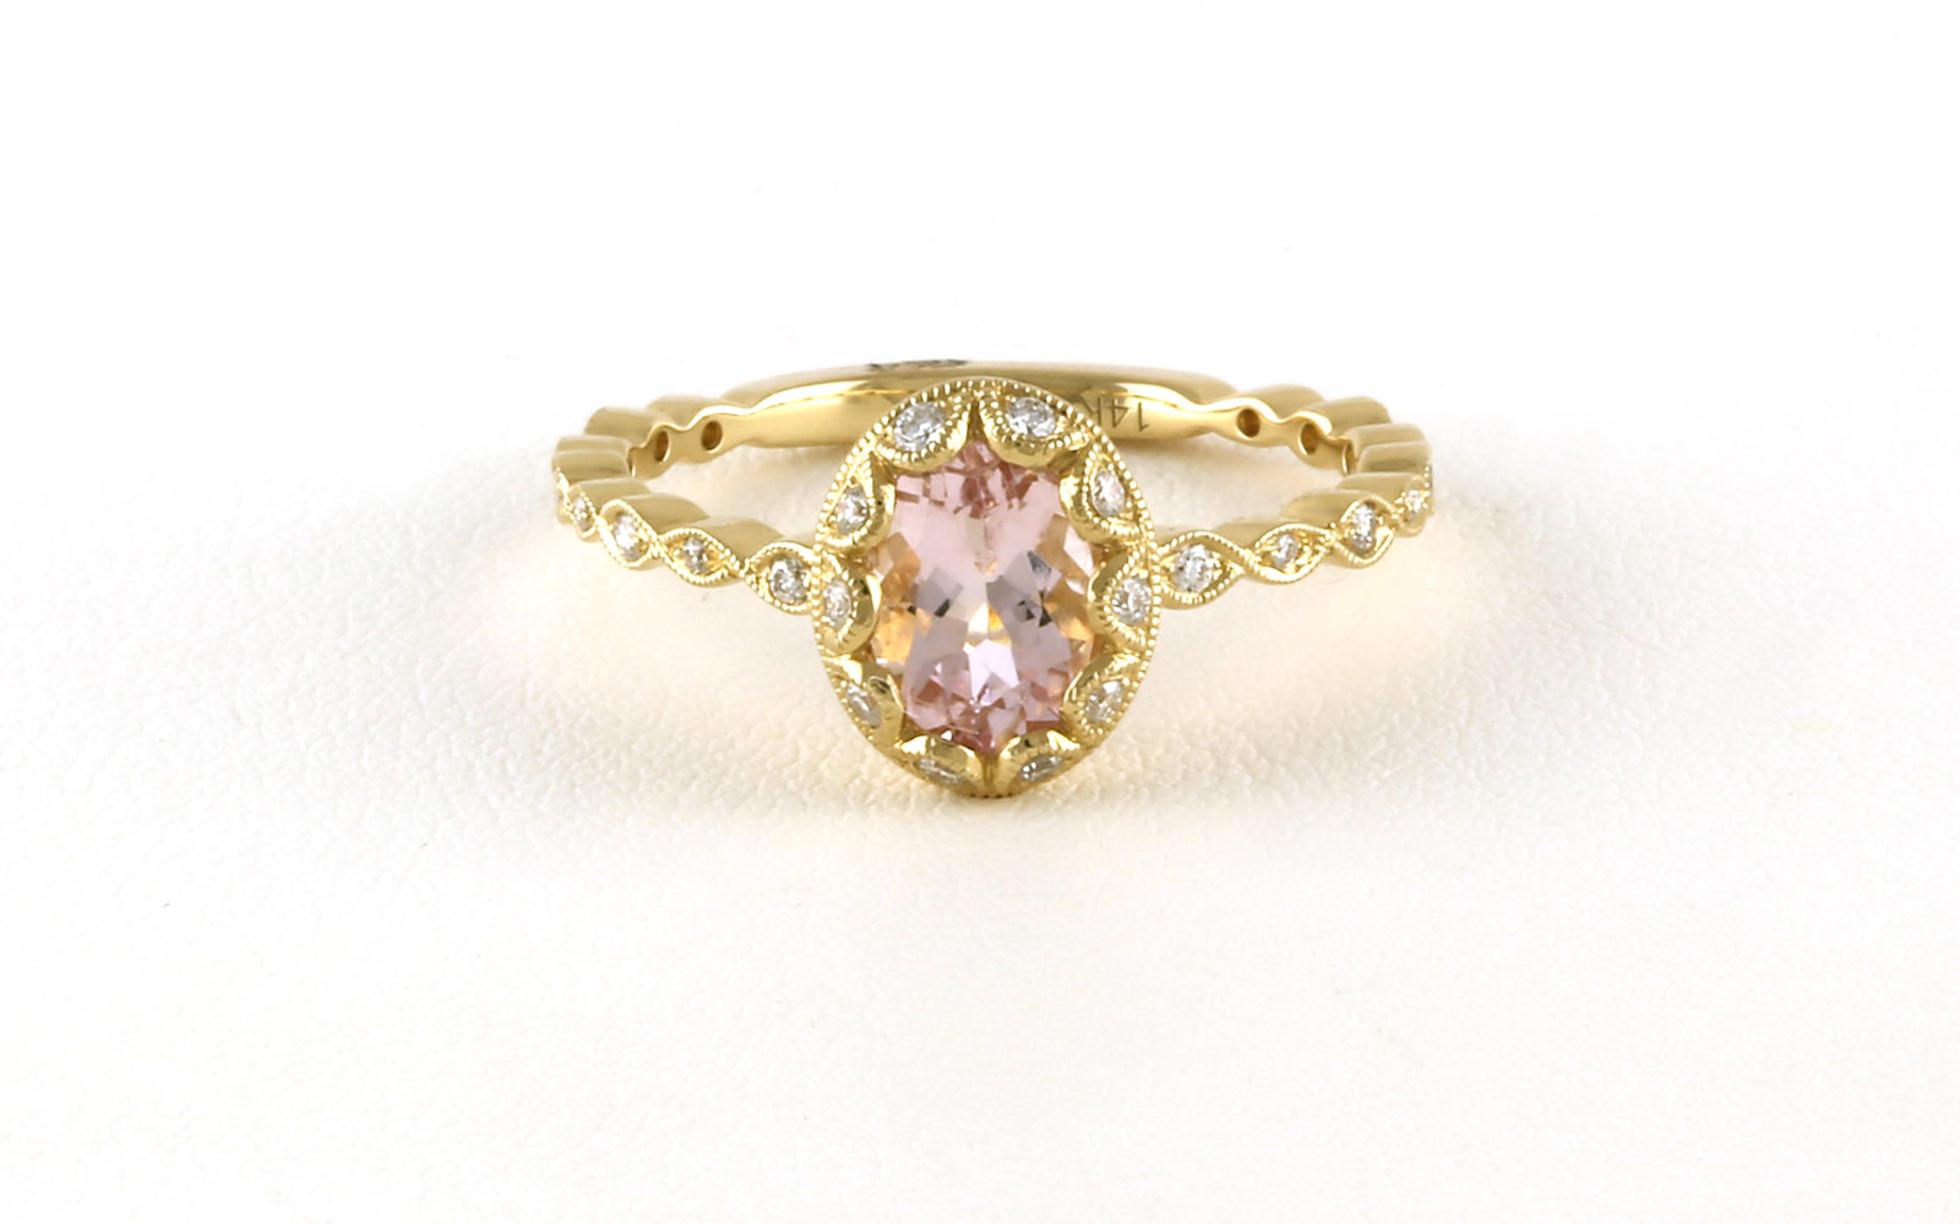 Antique-style Scalloped Halo Morganite Ring with Milgrain Details in Yellow Gold